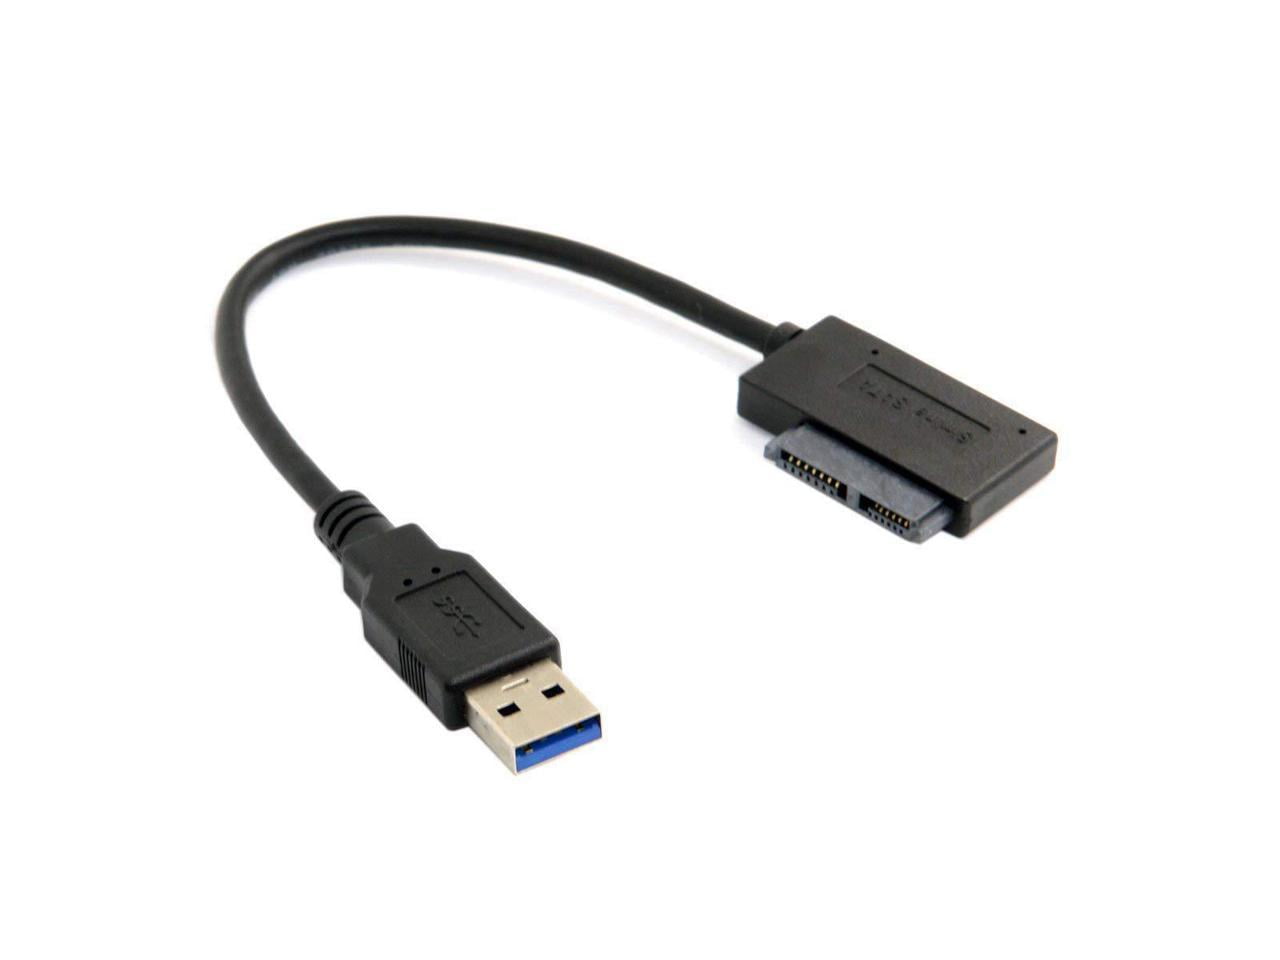 EYOOLD USB 3.0 to 7+6 13-pin Slimline SATA Adapter Cable for Laptop CD/DVD  ROM Optical Drive